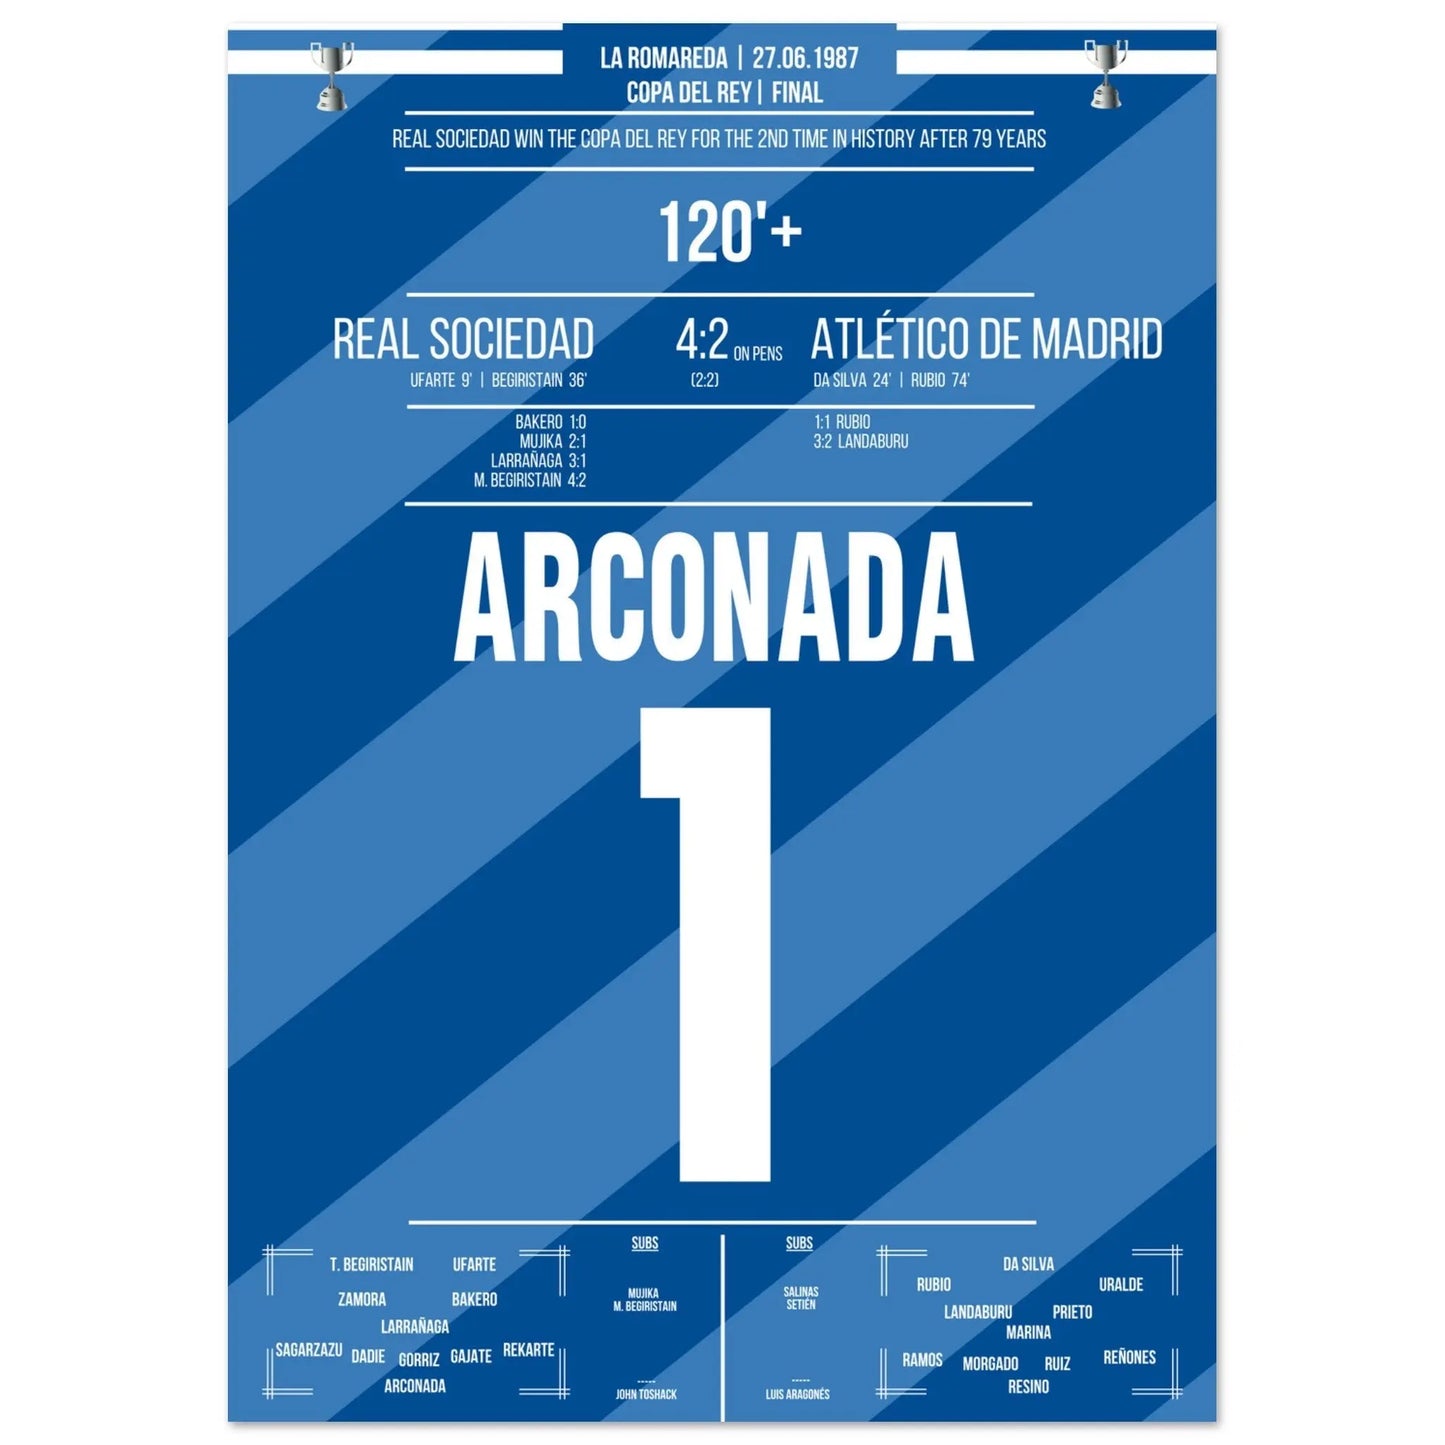 Luis Arconada saves the decisive penalty and crowns Real Sociedad the 1987 Copa Del Rey winners